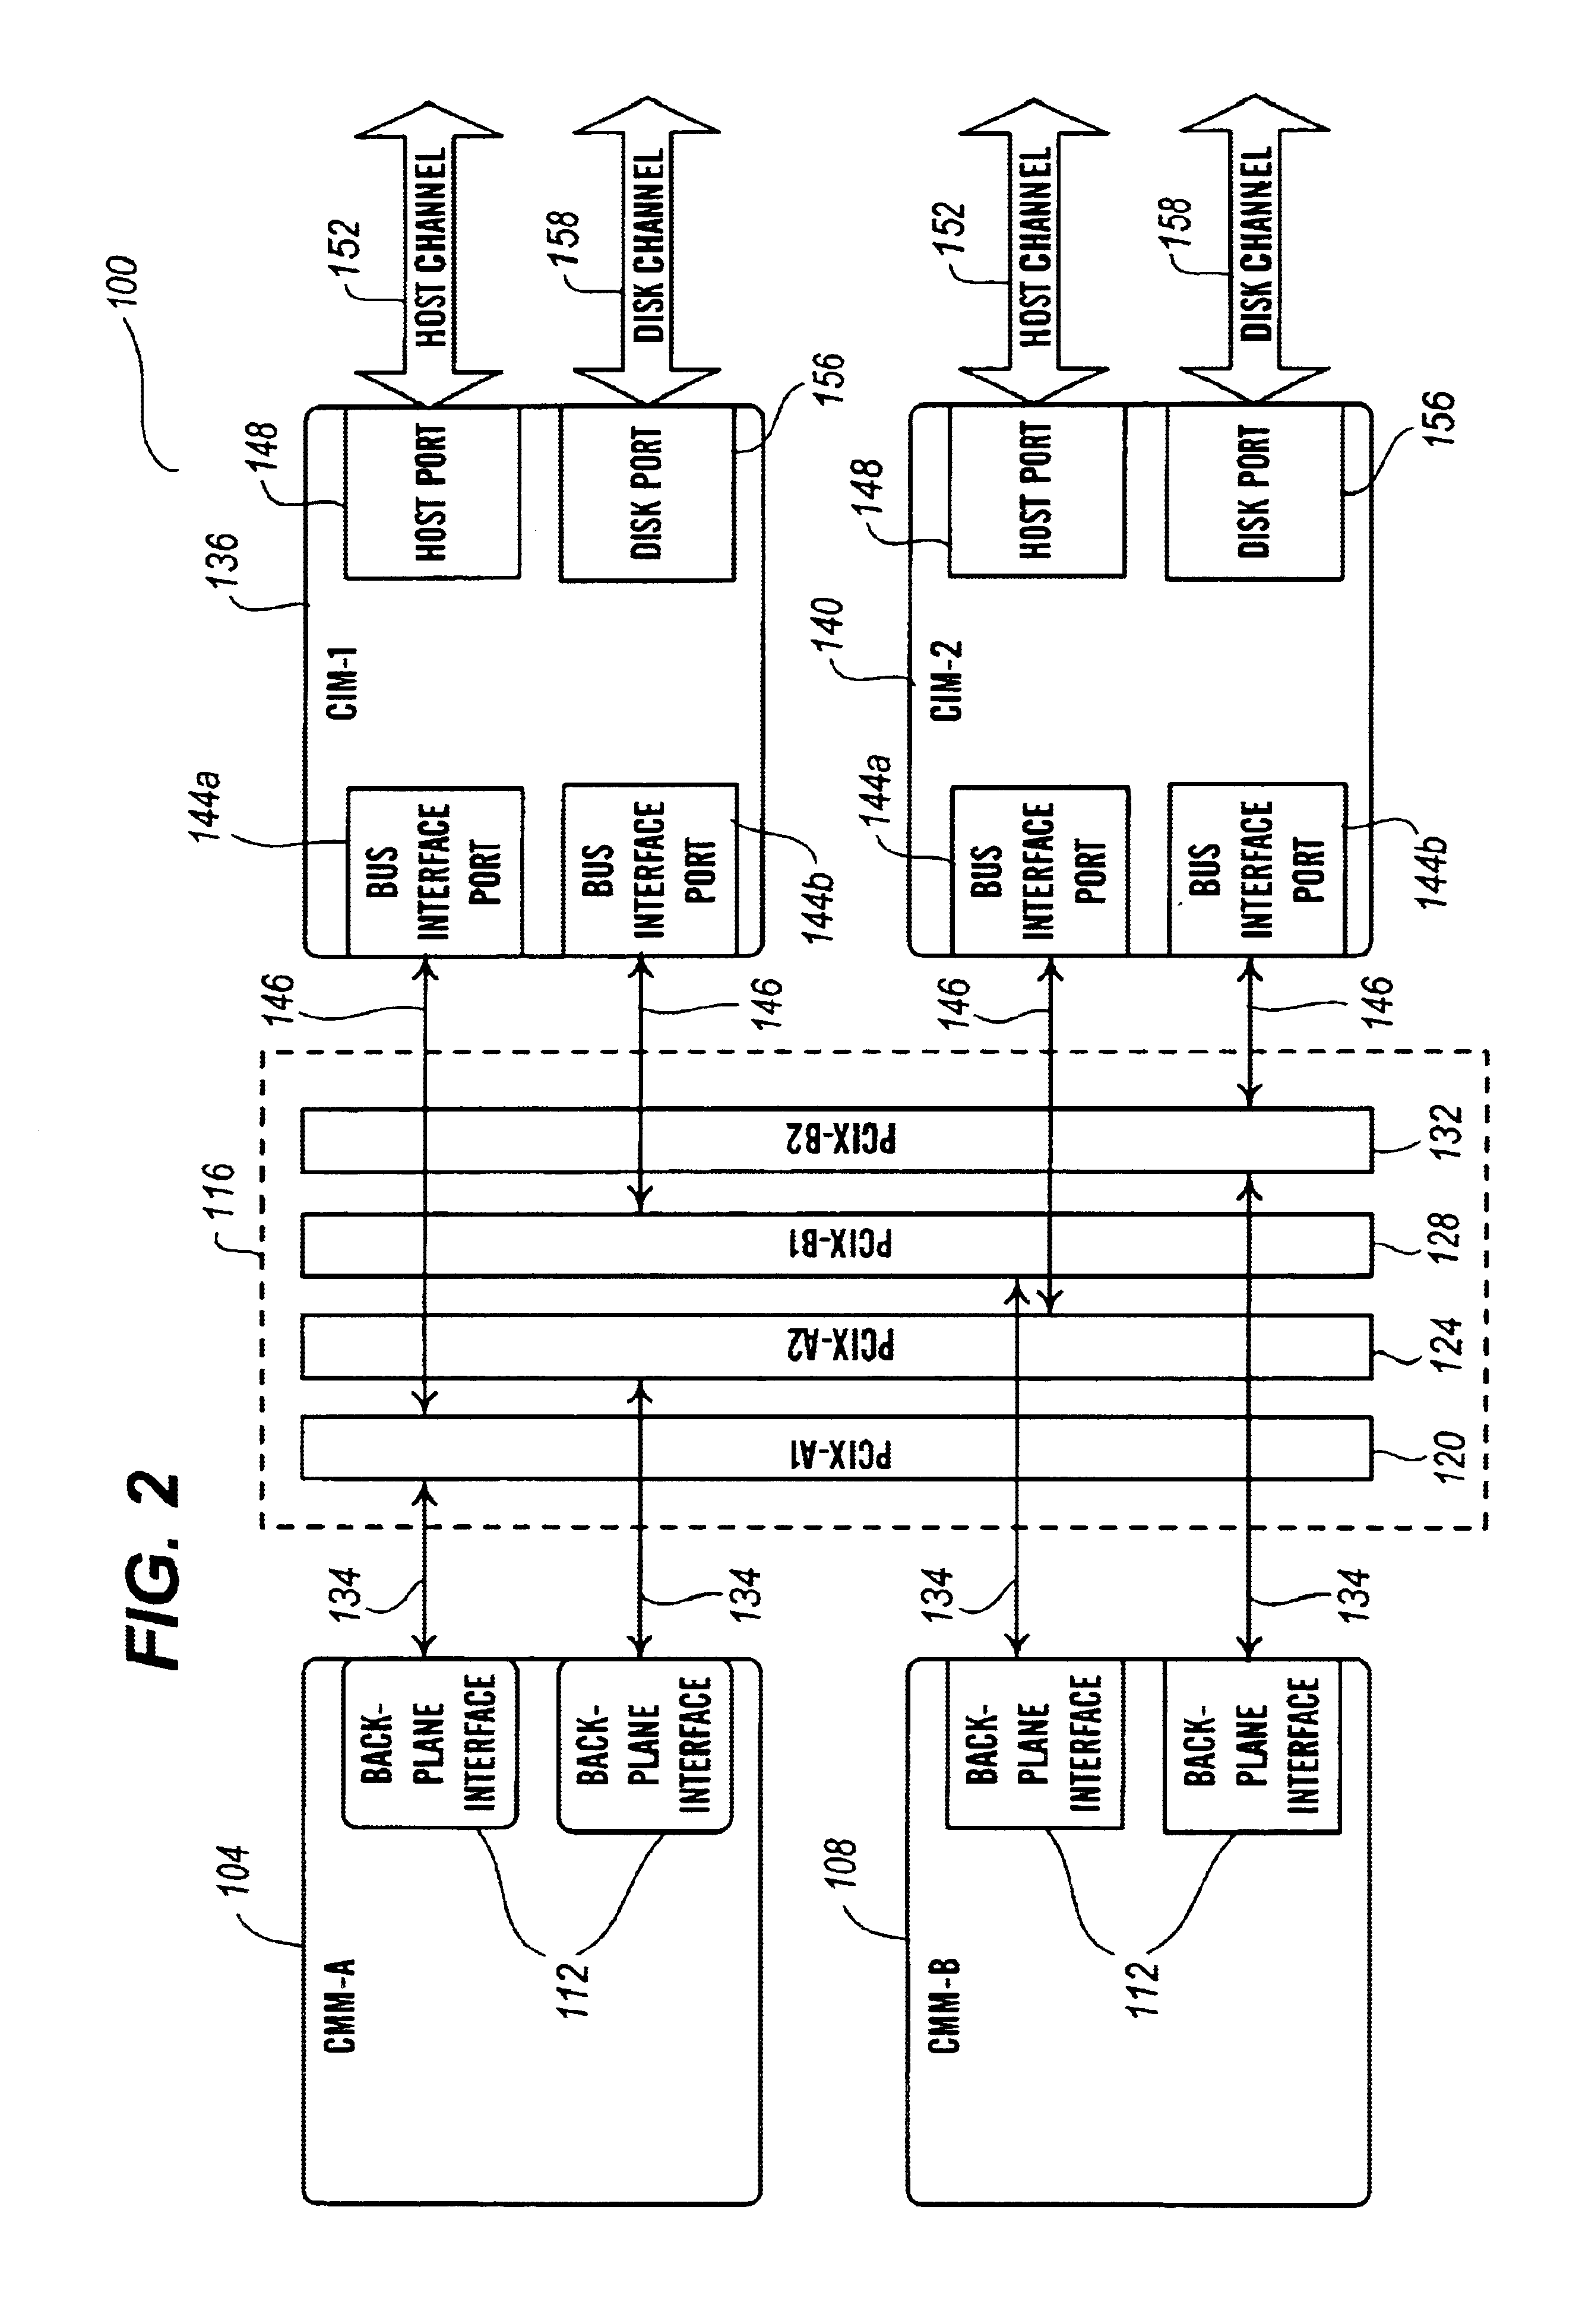 Bus zoning in a channel independent storage controller architecture